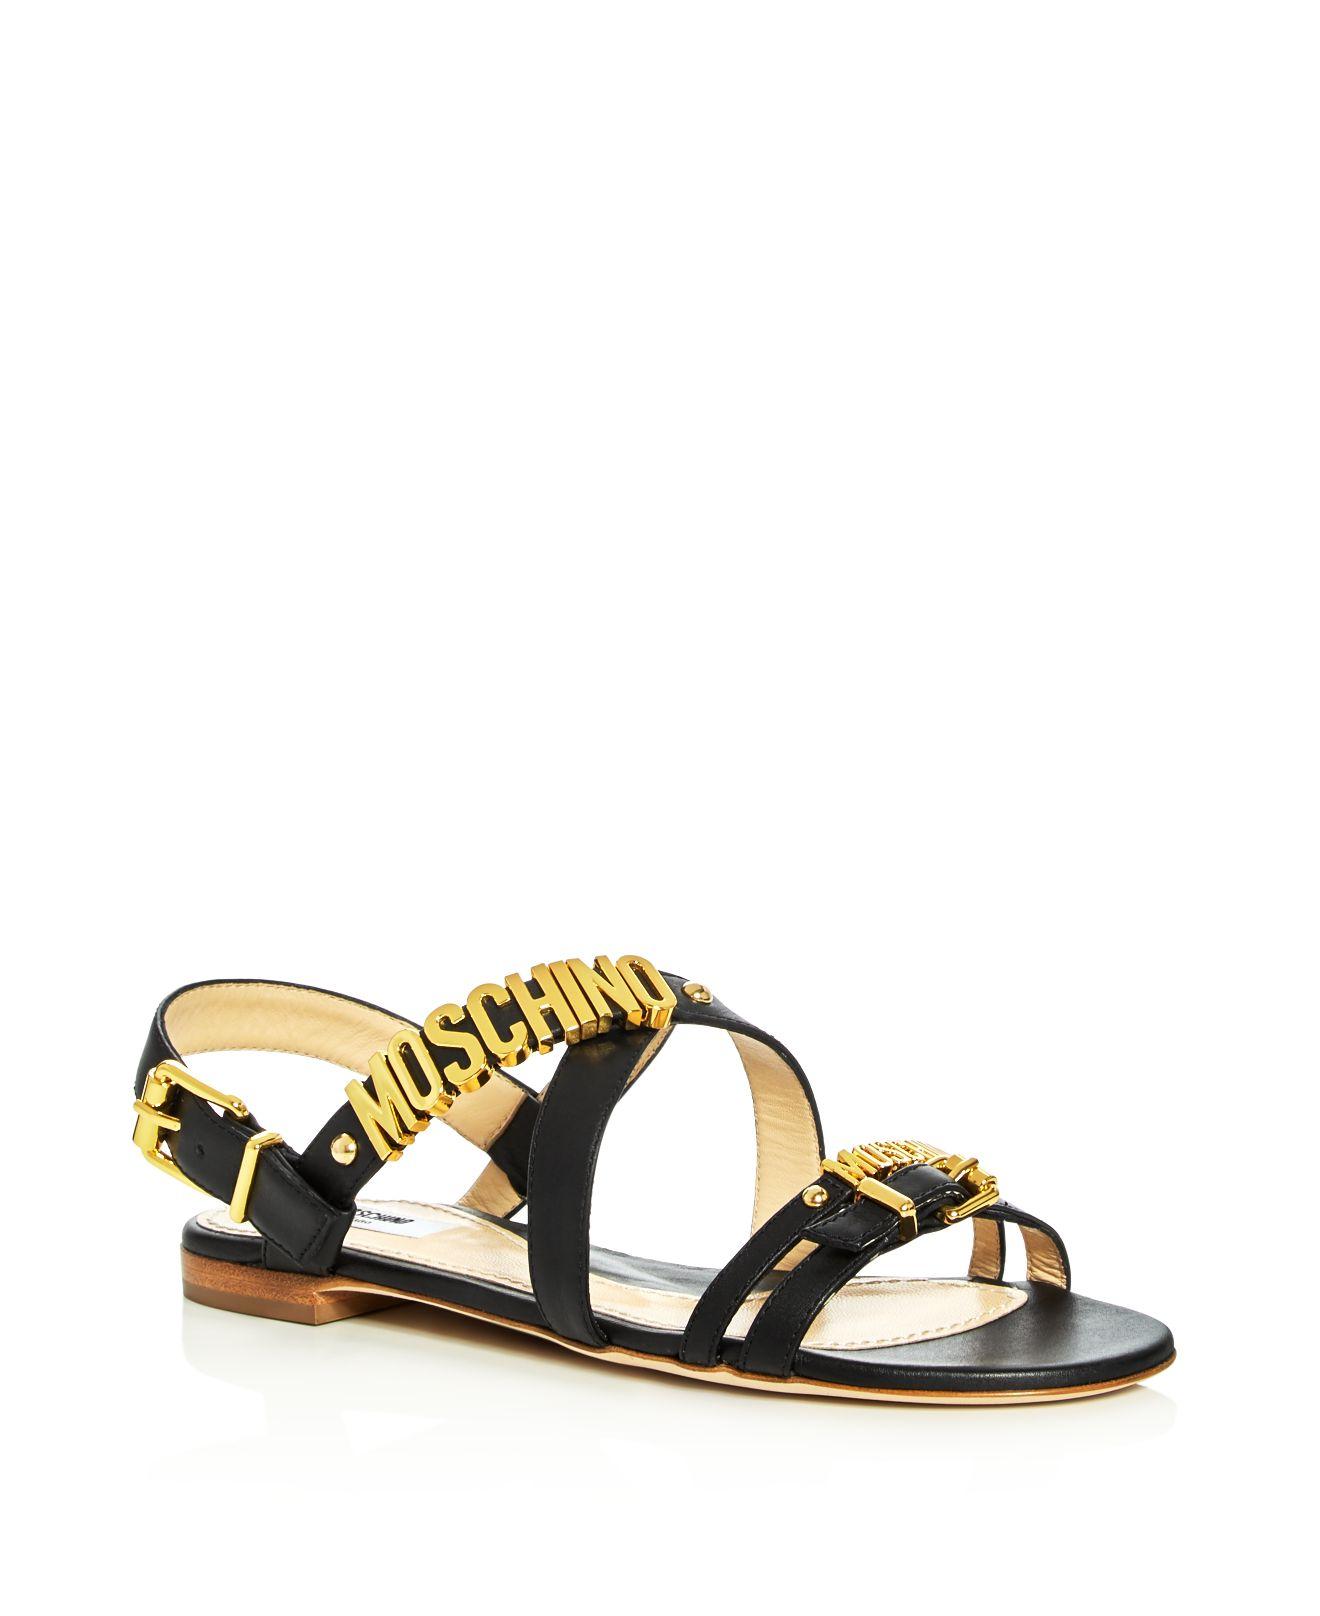 Lyst - Moschino Logo Strappy Slingback Sandals in Metallic